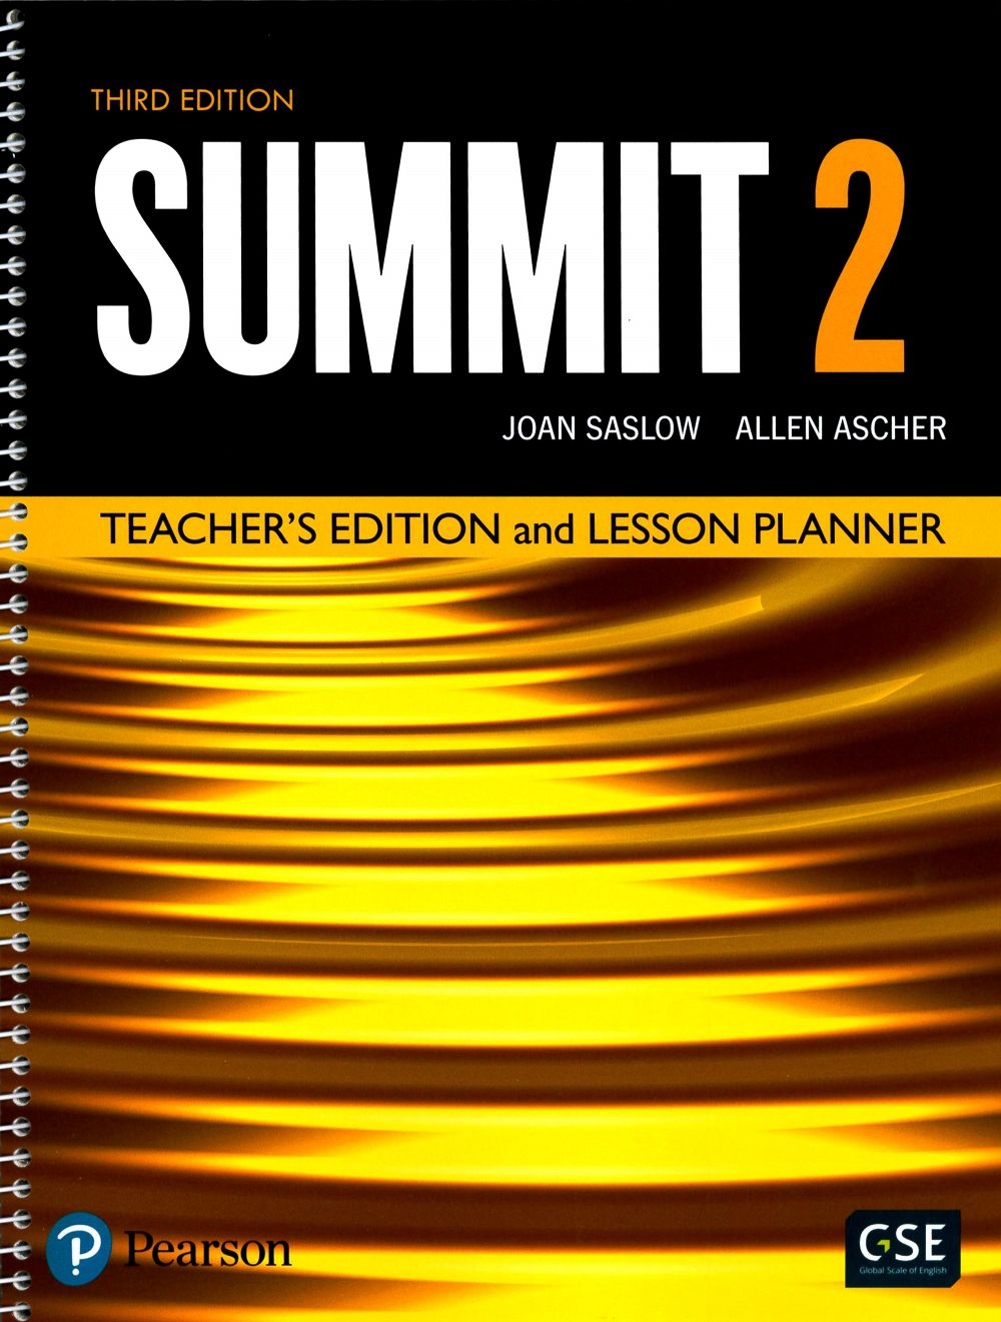 Summit 3/e (2) Teacher’s Edition and Lesson Planner